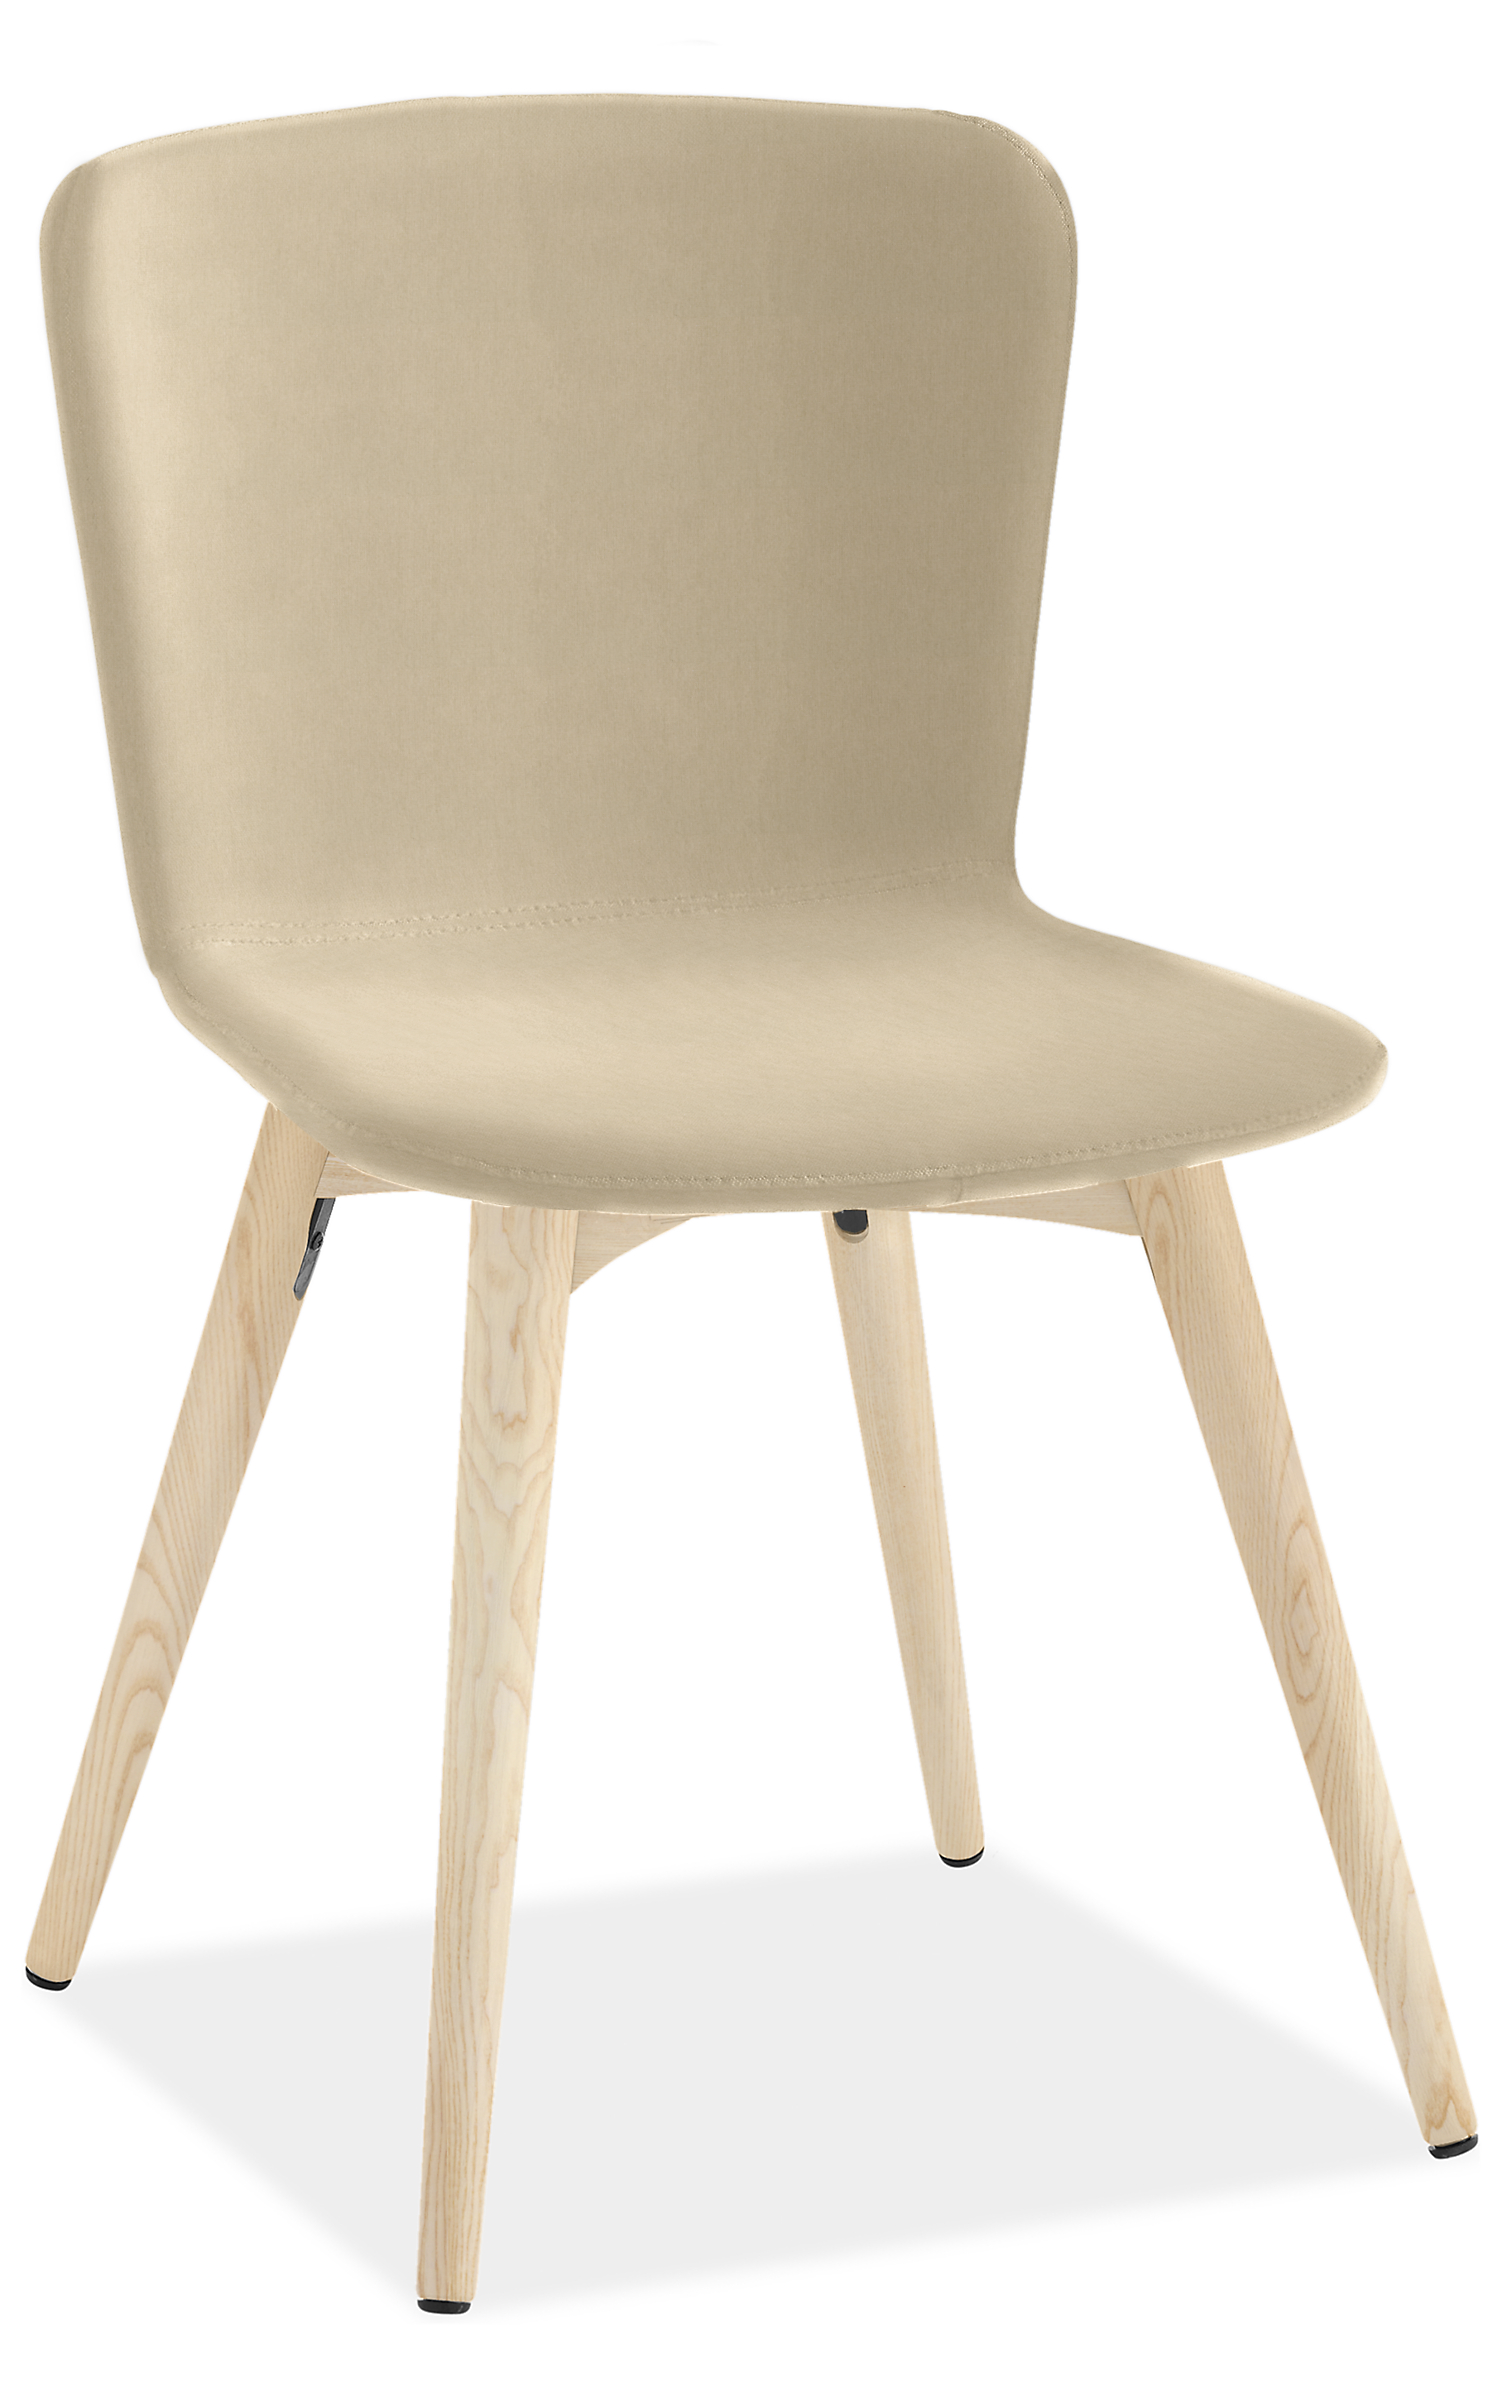 Delilah Dining Chair in Creel Natural with Ash Legs